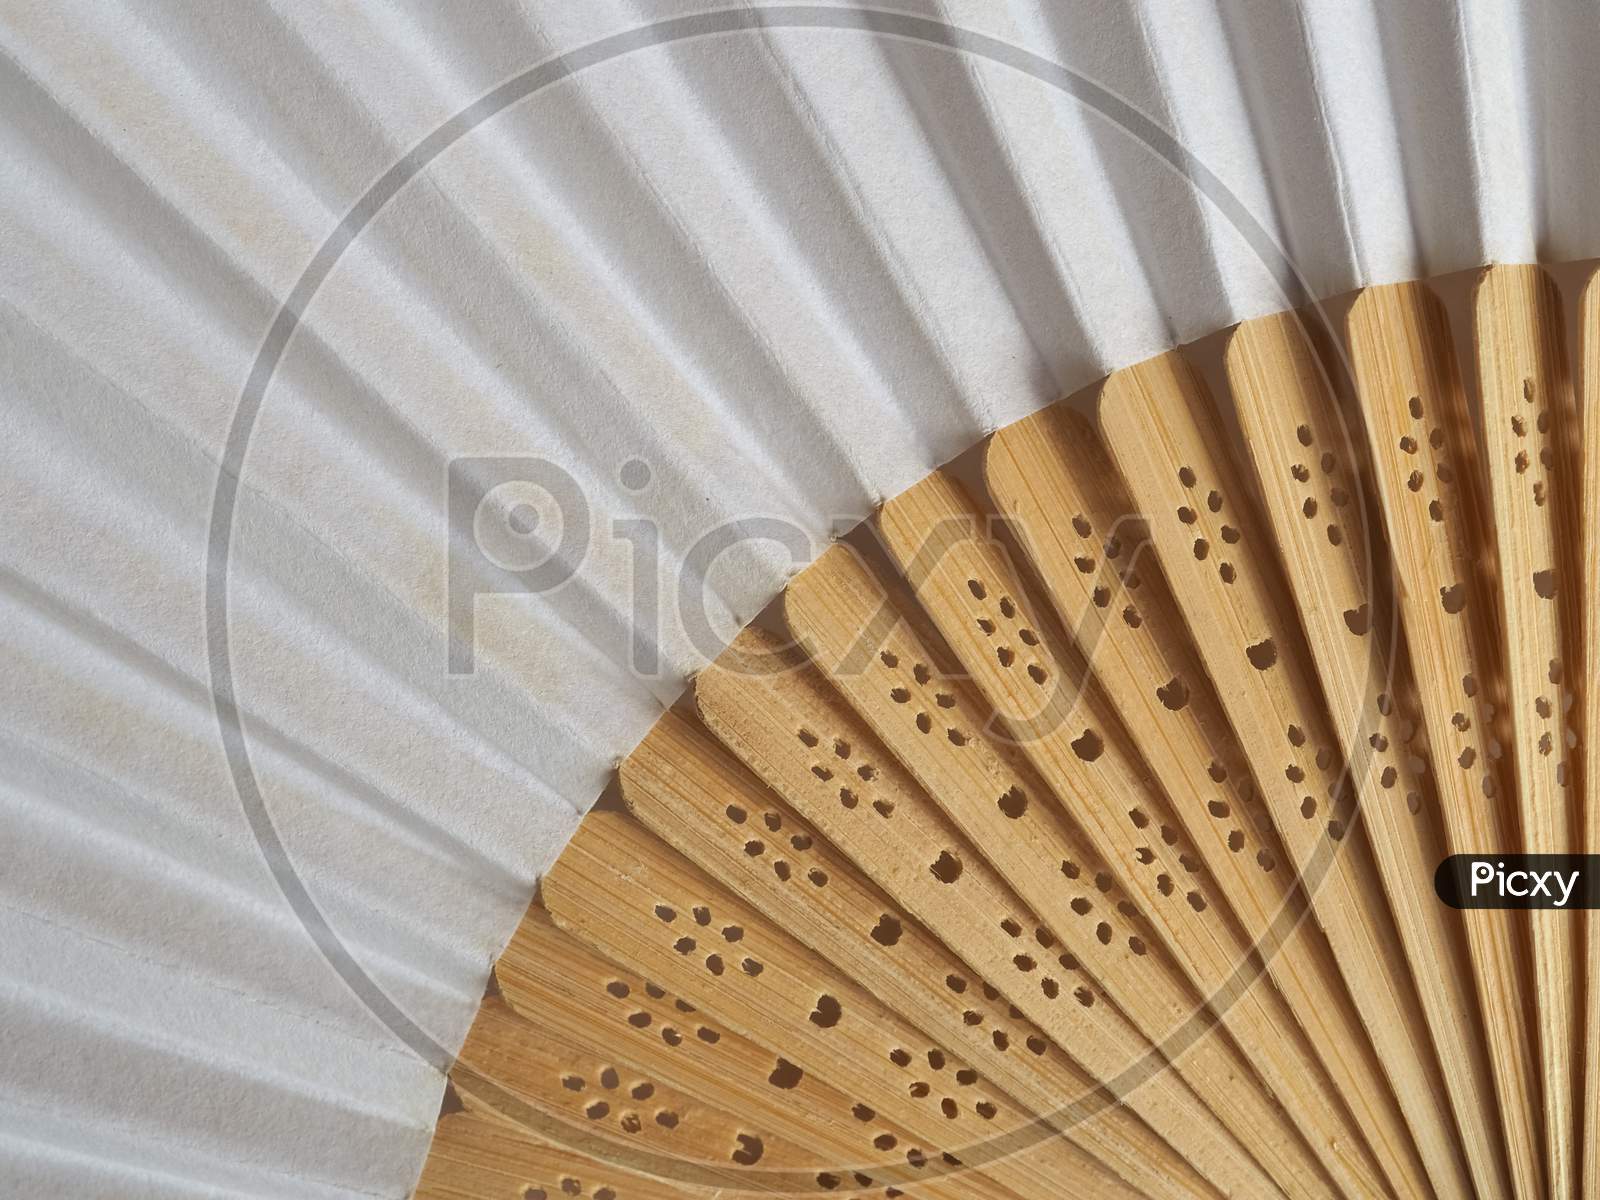 Traditional Japanese Or Chinese Hand Fan